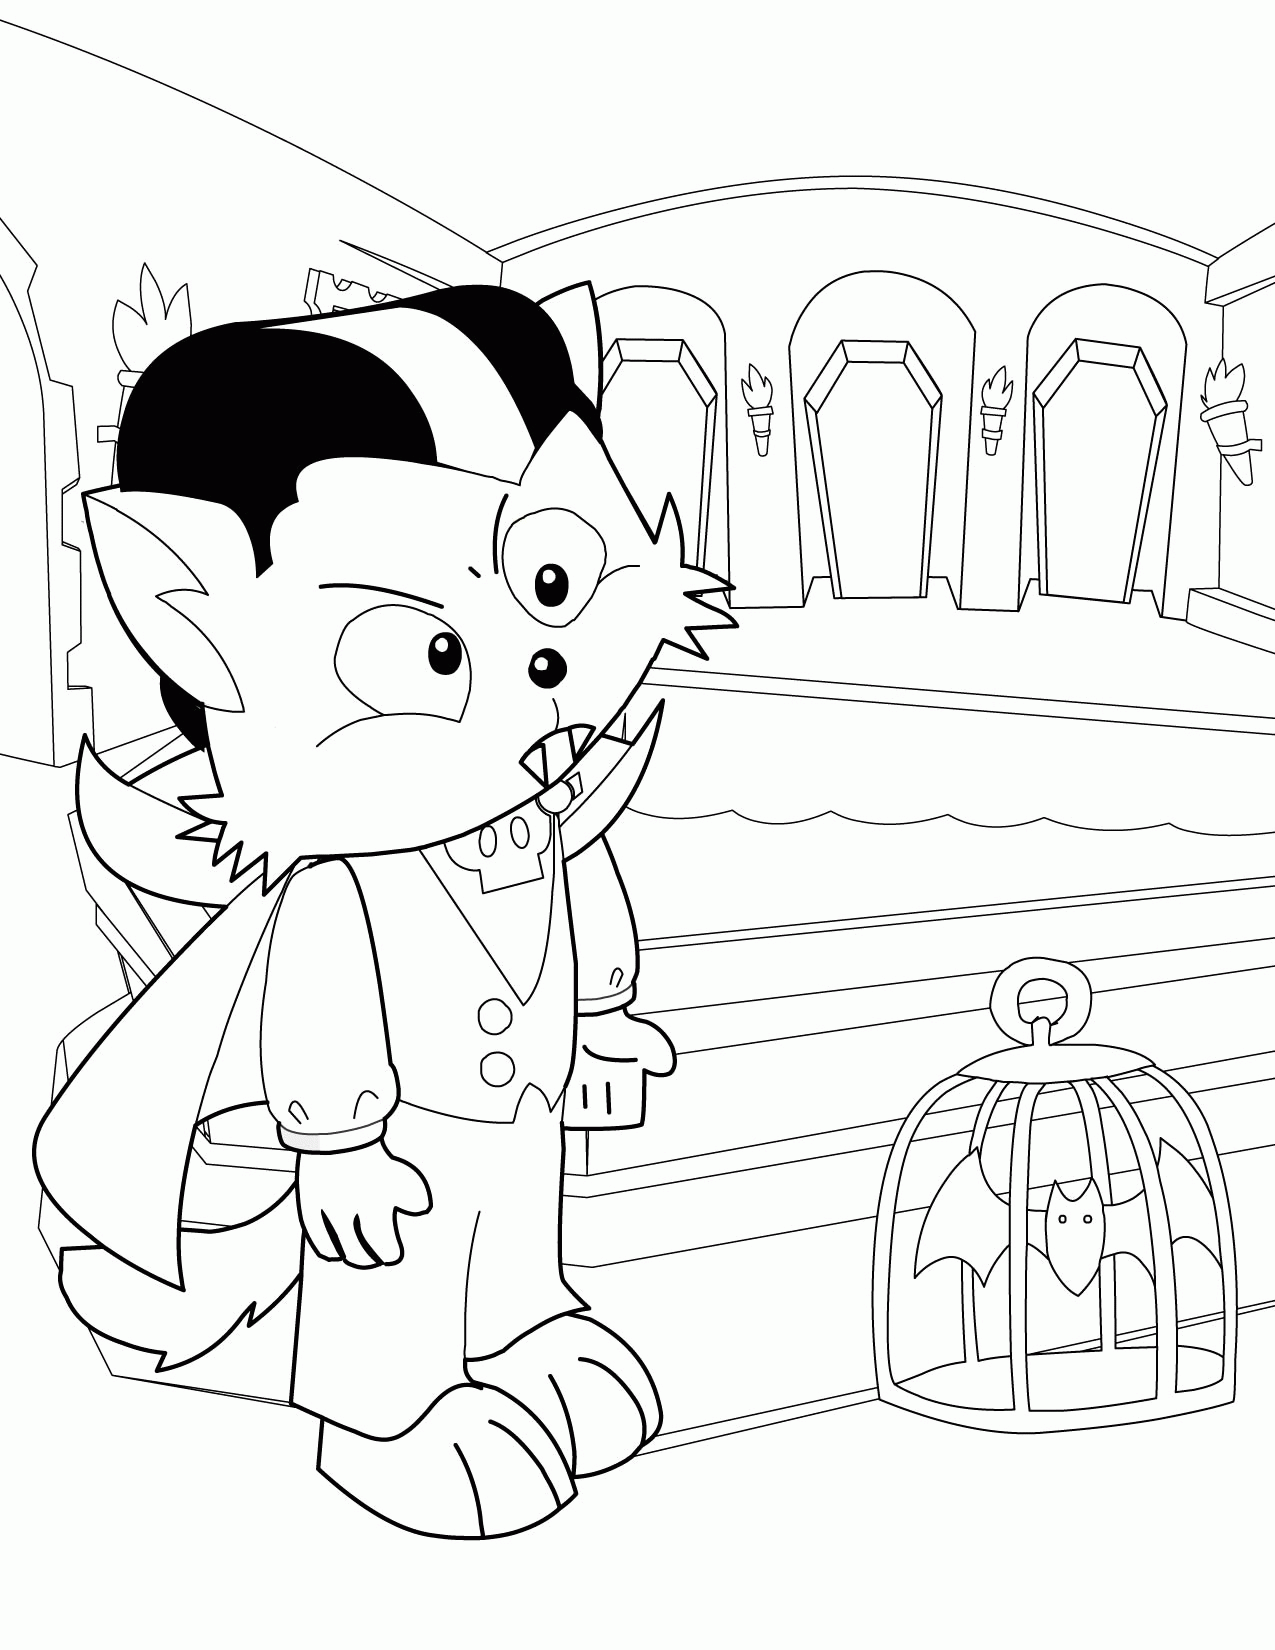 Vampire Coloring Page - Handipoints